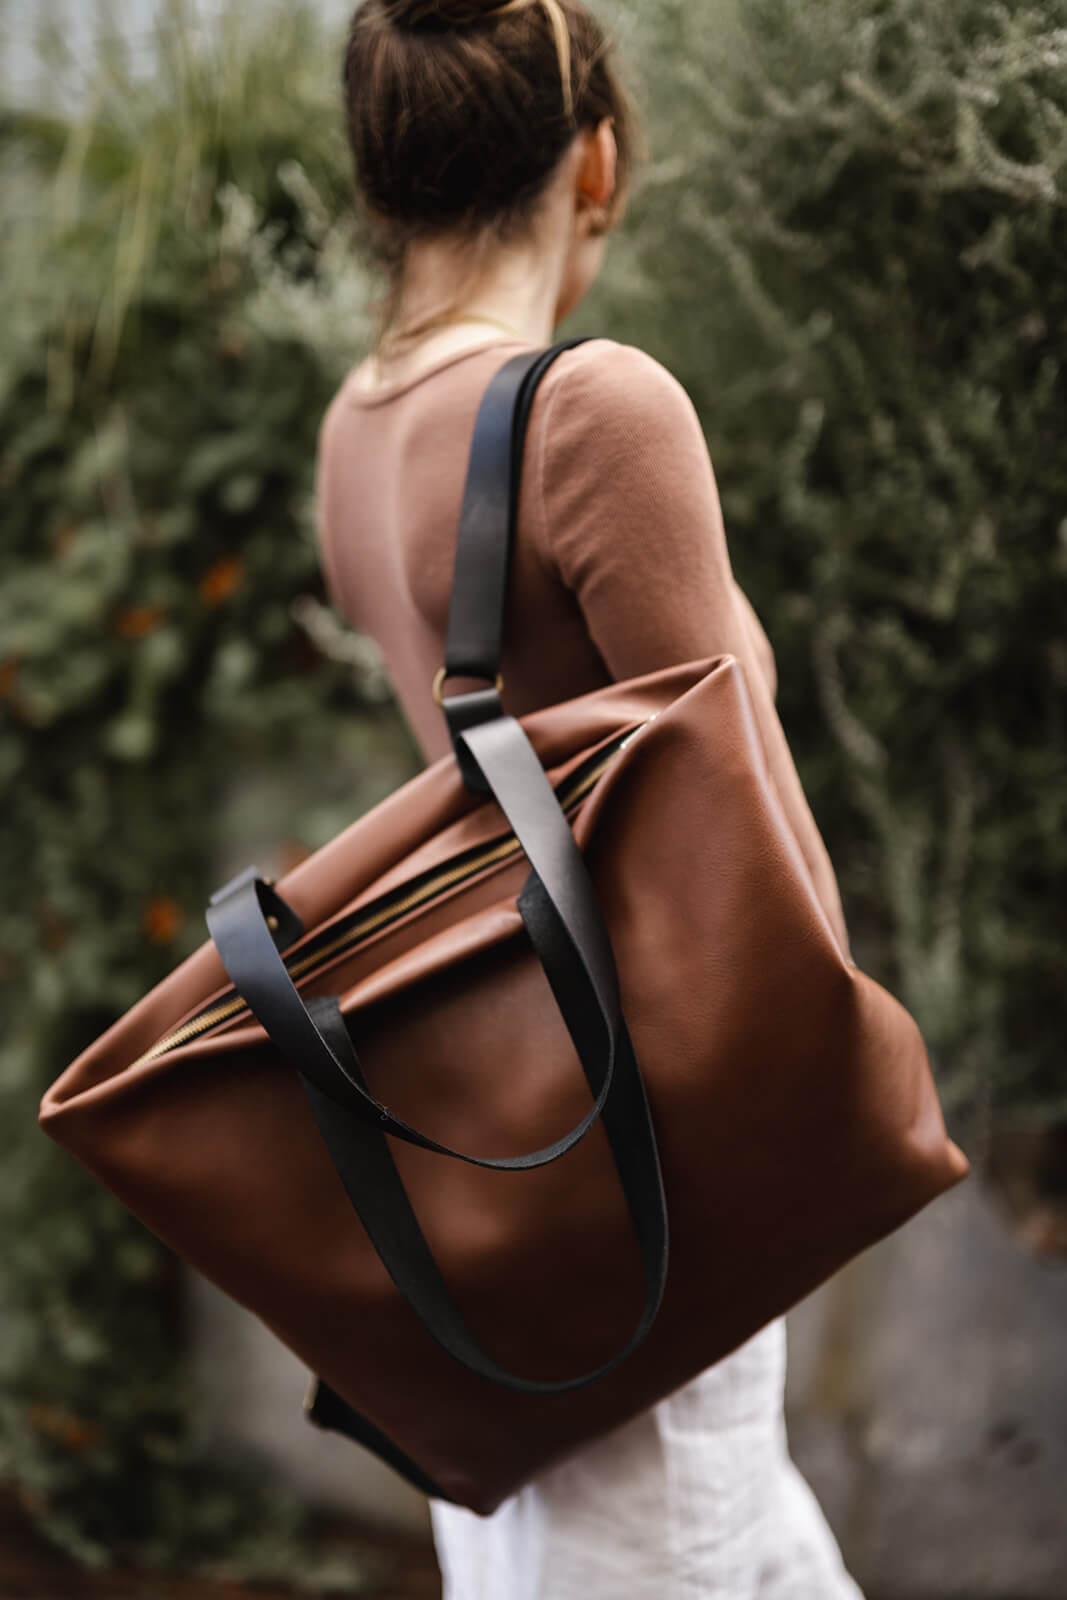 Woman with back to camera with dark hair up and brown top and white skirt standing in front of greenery. She is modelling the Tan Leather Backpack & Tote with Black straps by Ella Jackson